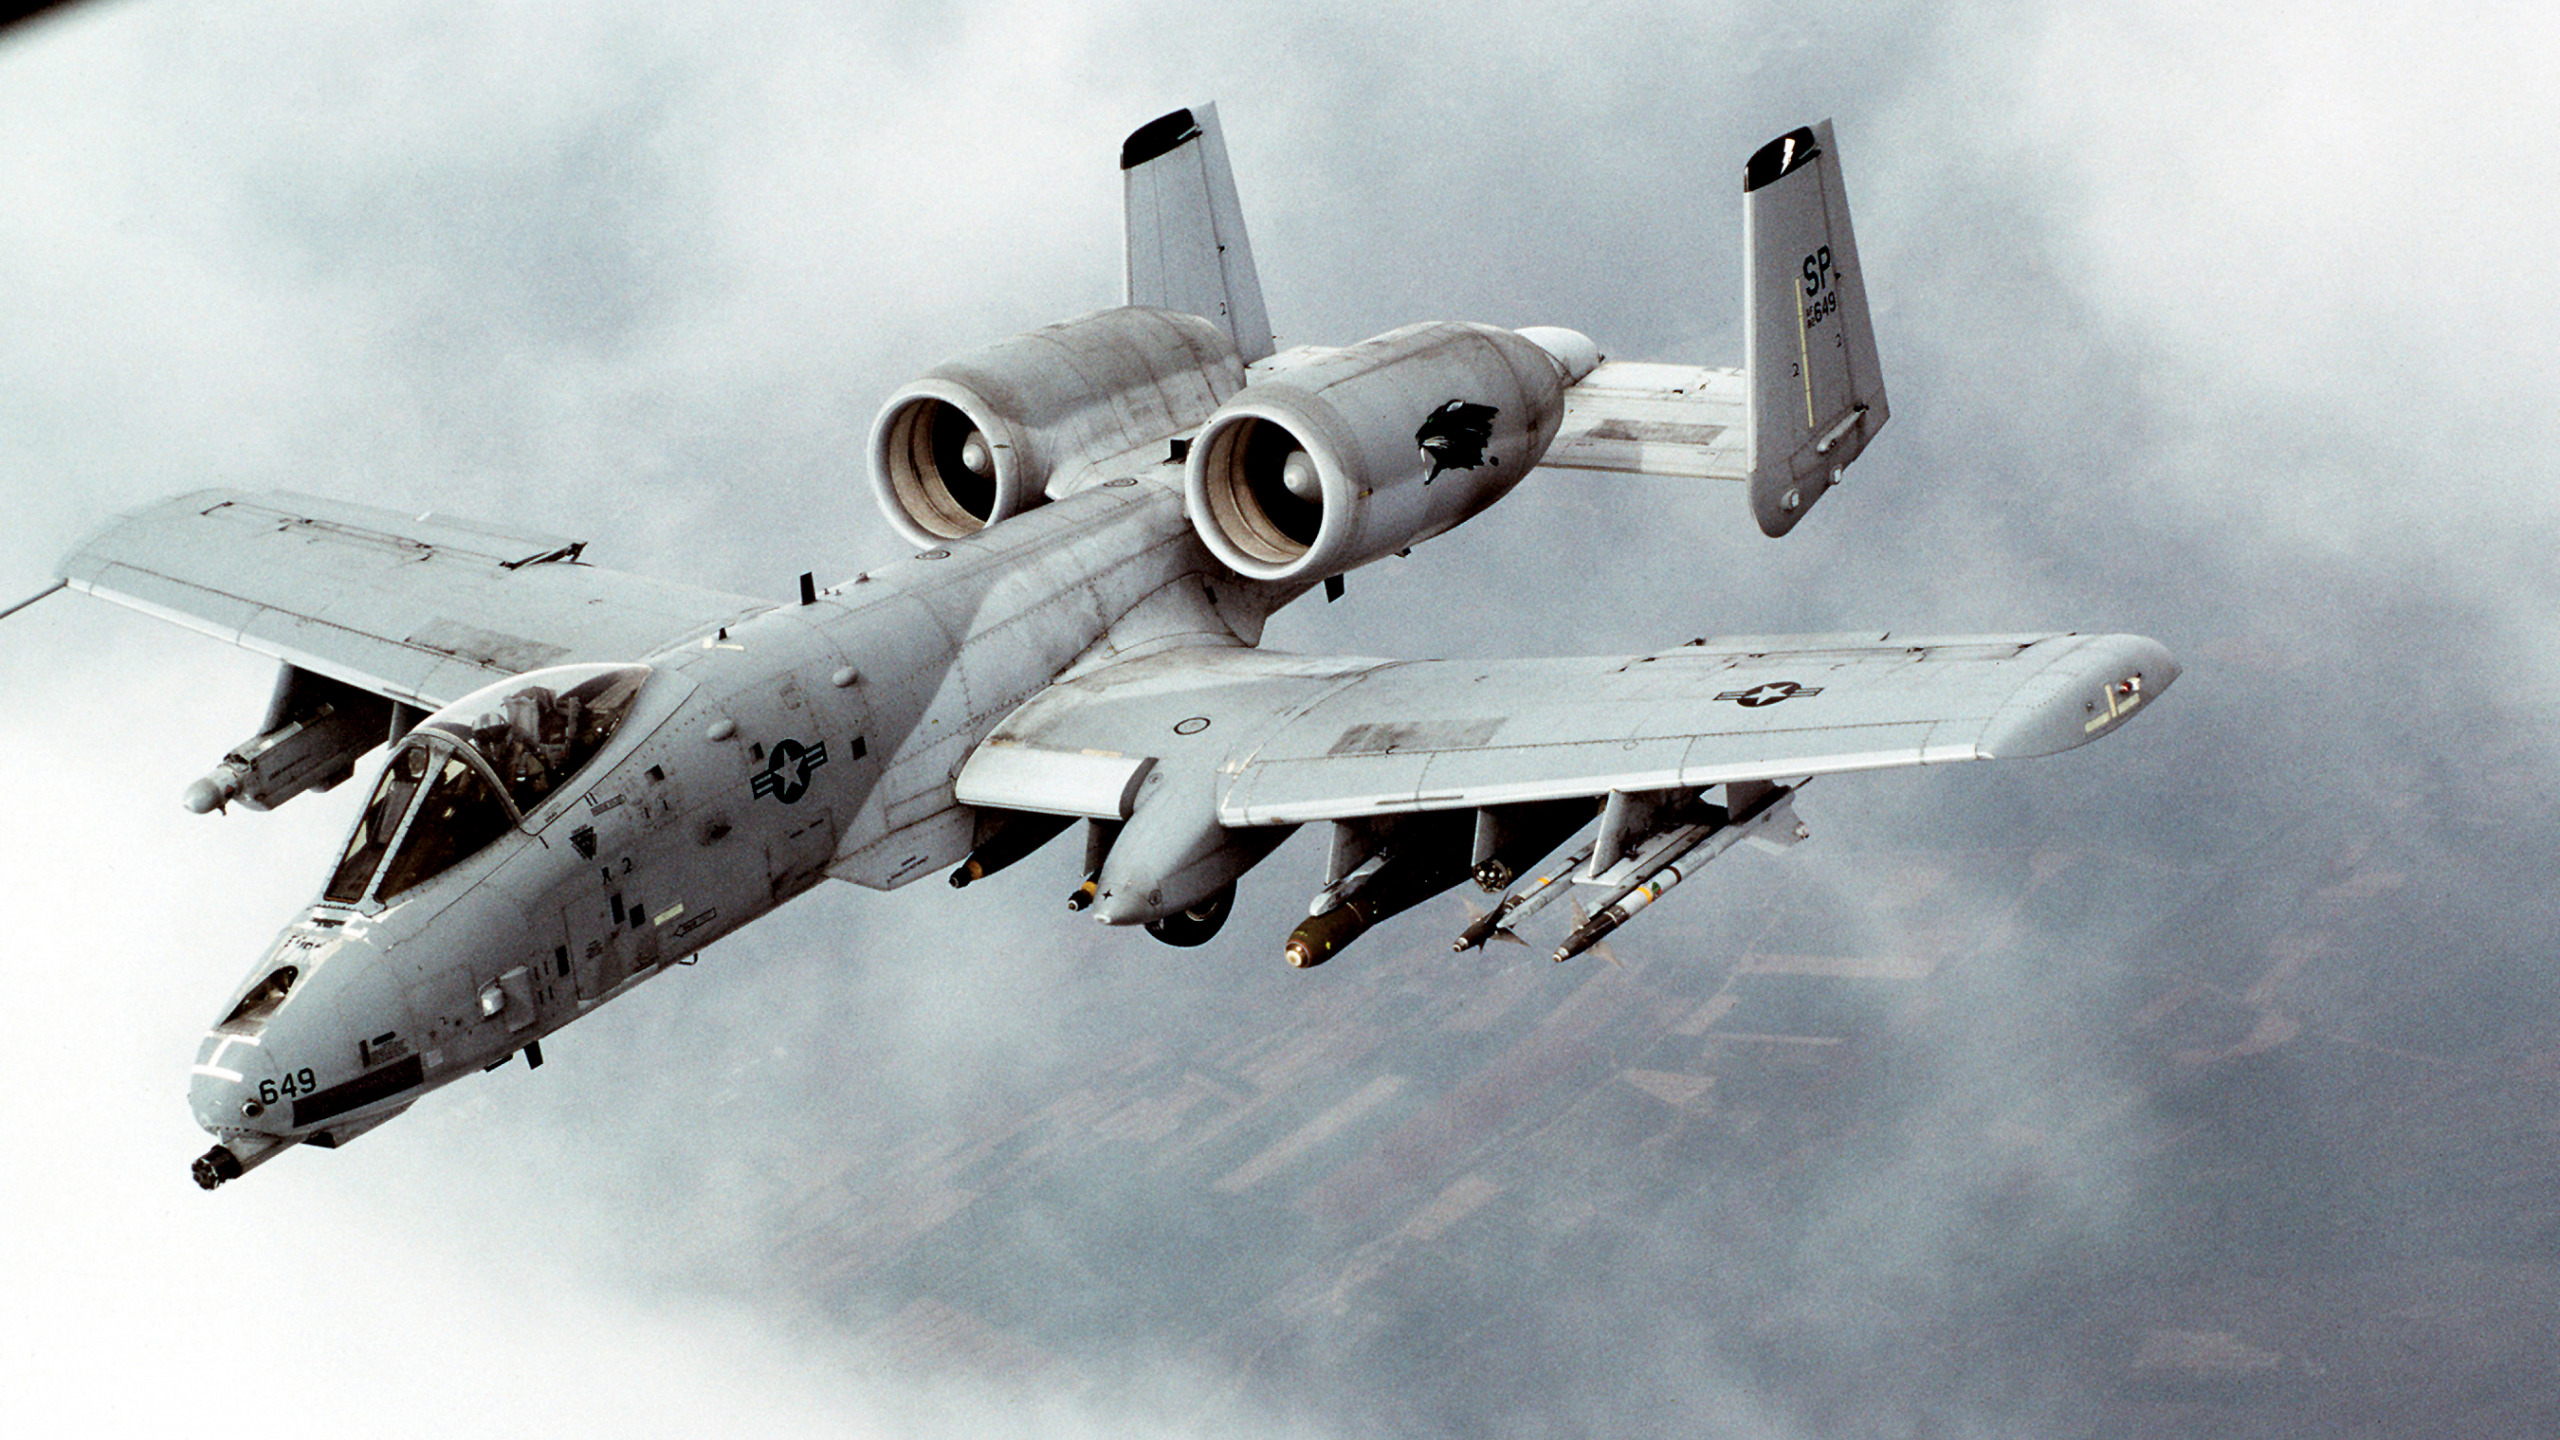 A10 A 10 Thunderbolt Aircraft Numbers Vehicle Military Military Aircraft Warthog 2560x1440